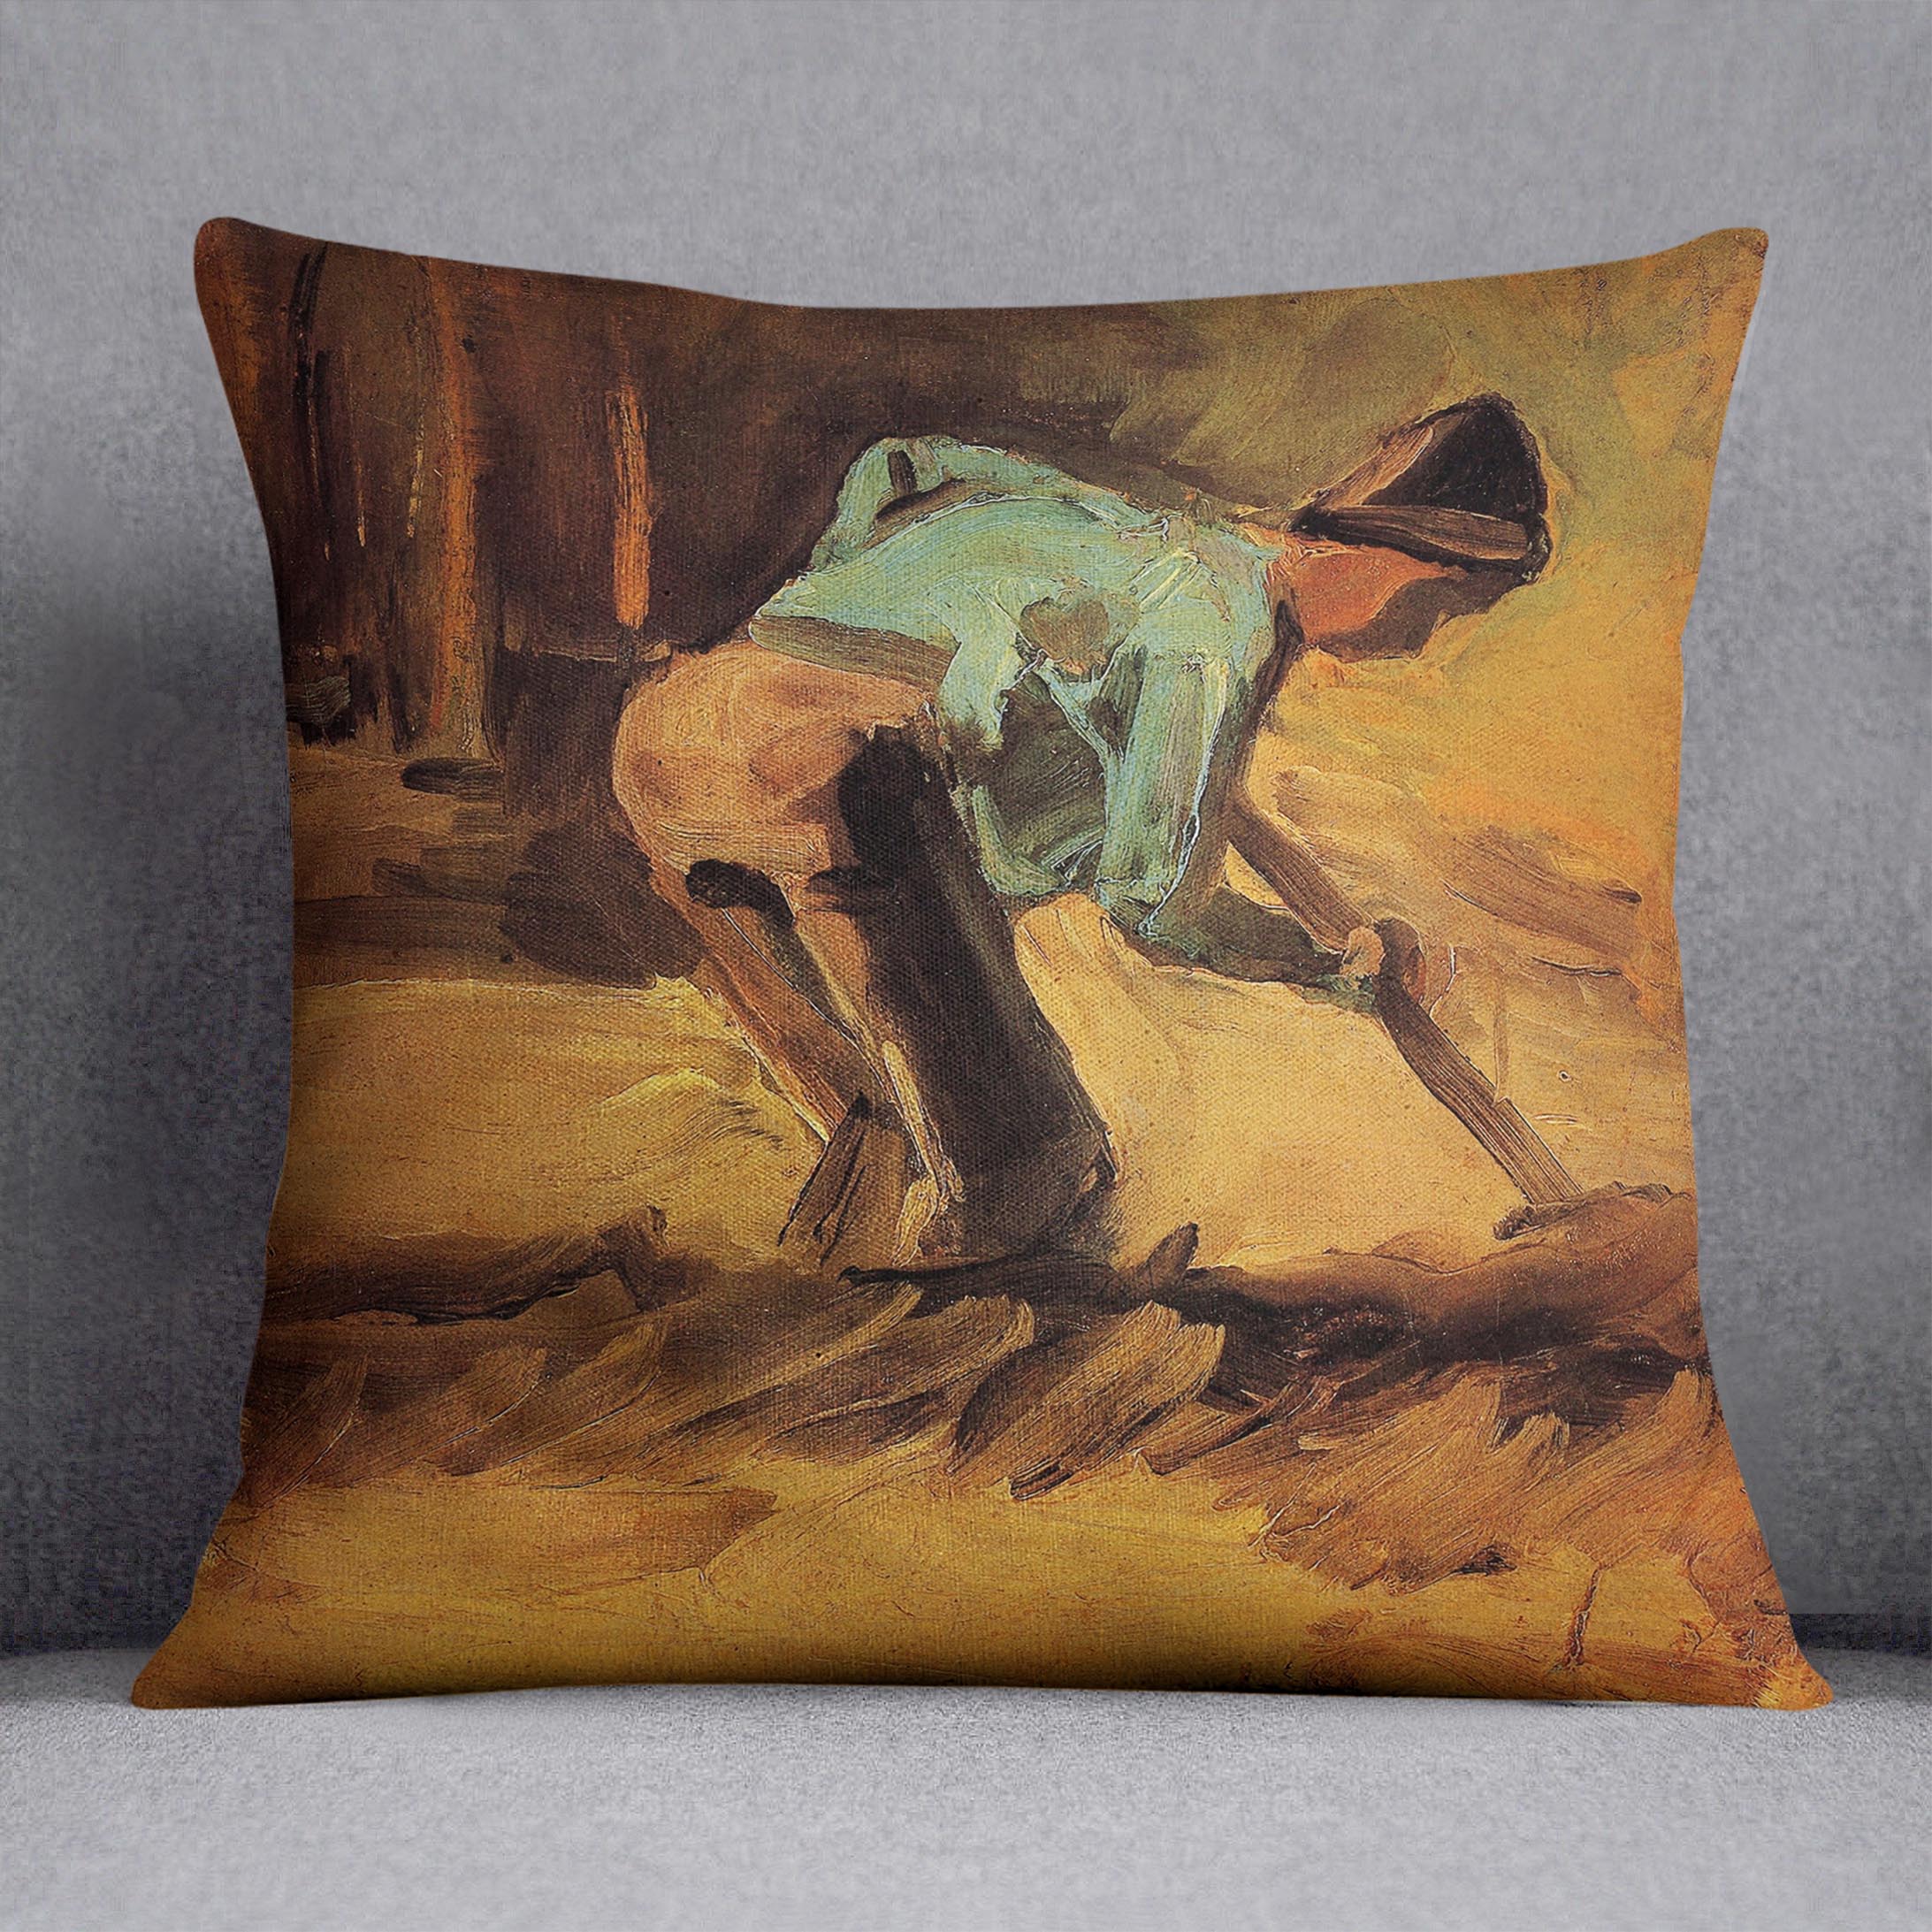 Man Stooping with Stick or Spade by Van Gogh Cushion